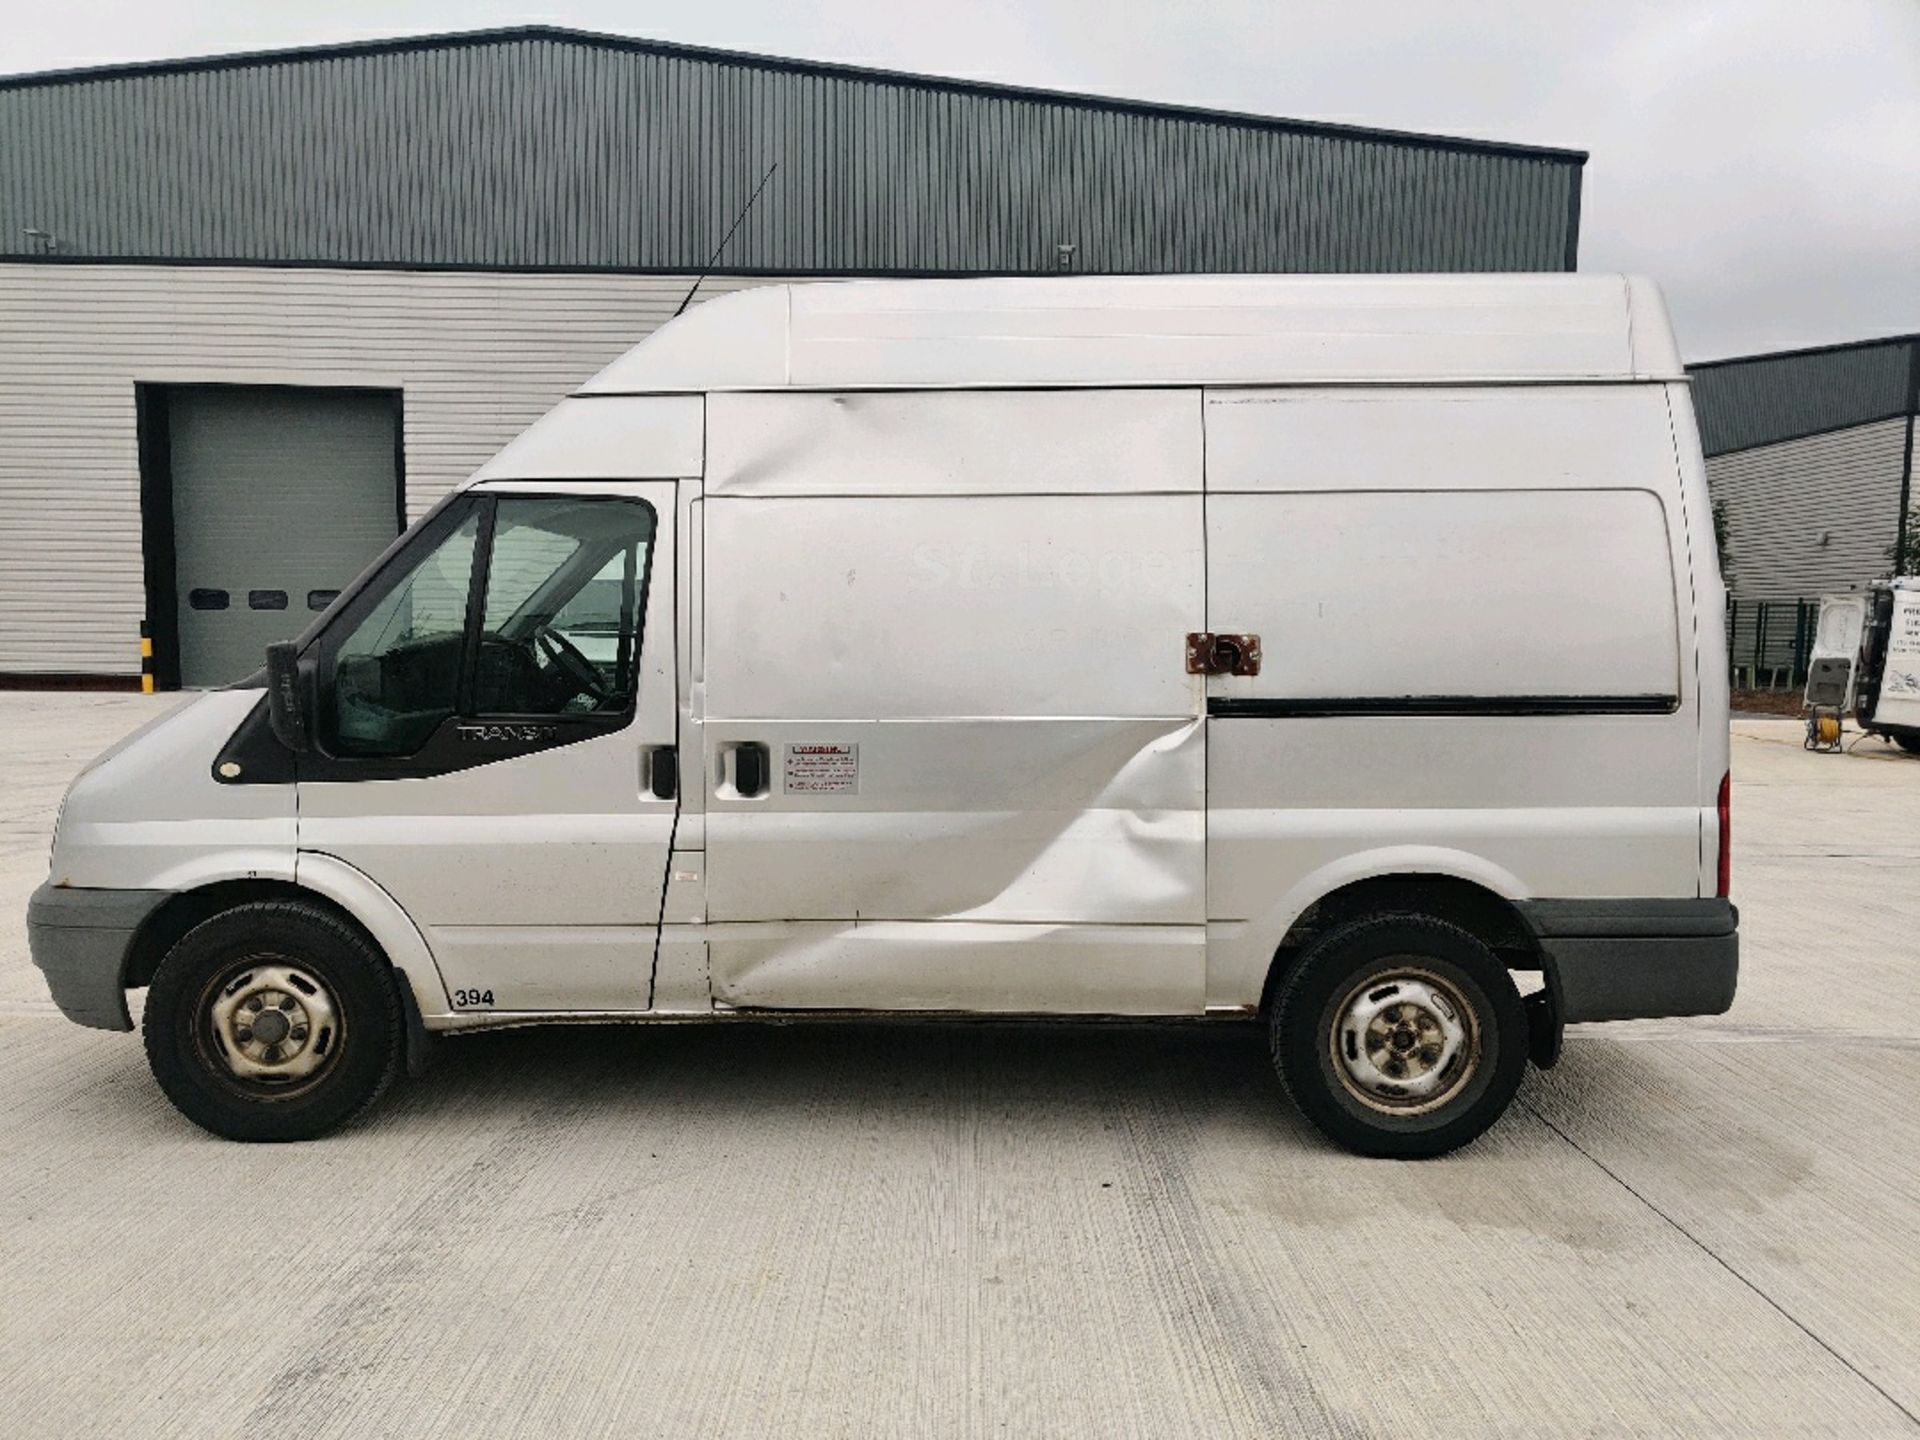 ENTRY DIRECT FROM LOCAL AUTHORITY Ford transit YR59HXD - Image 4 of 21